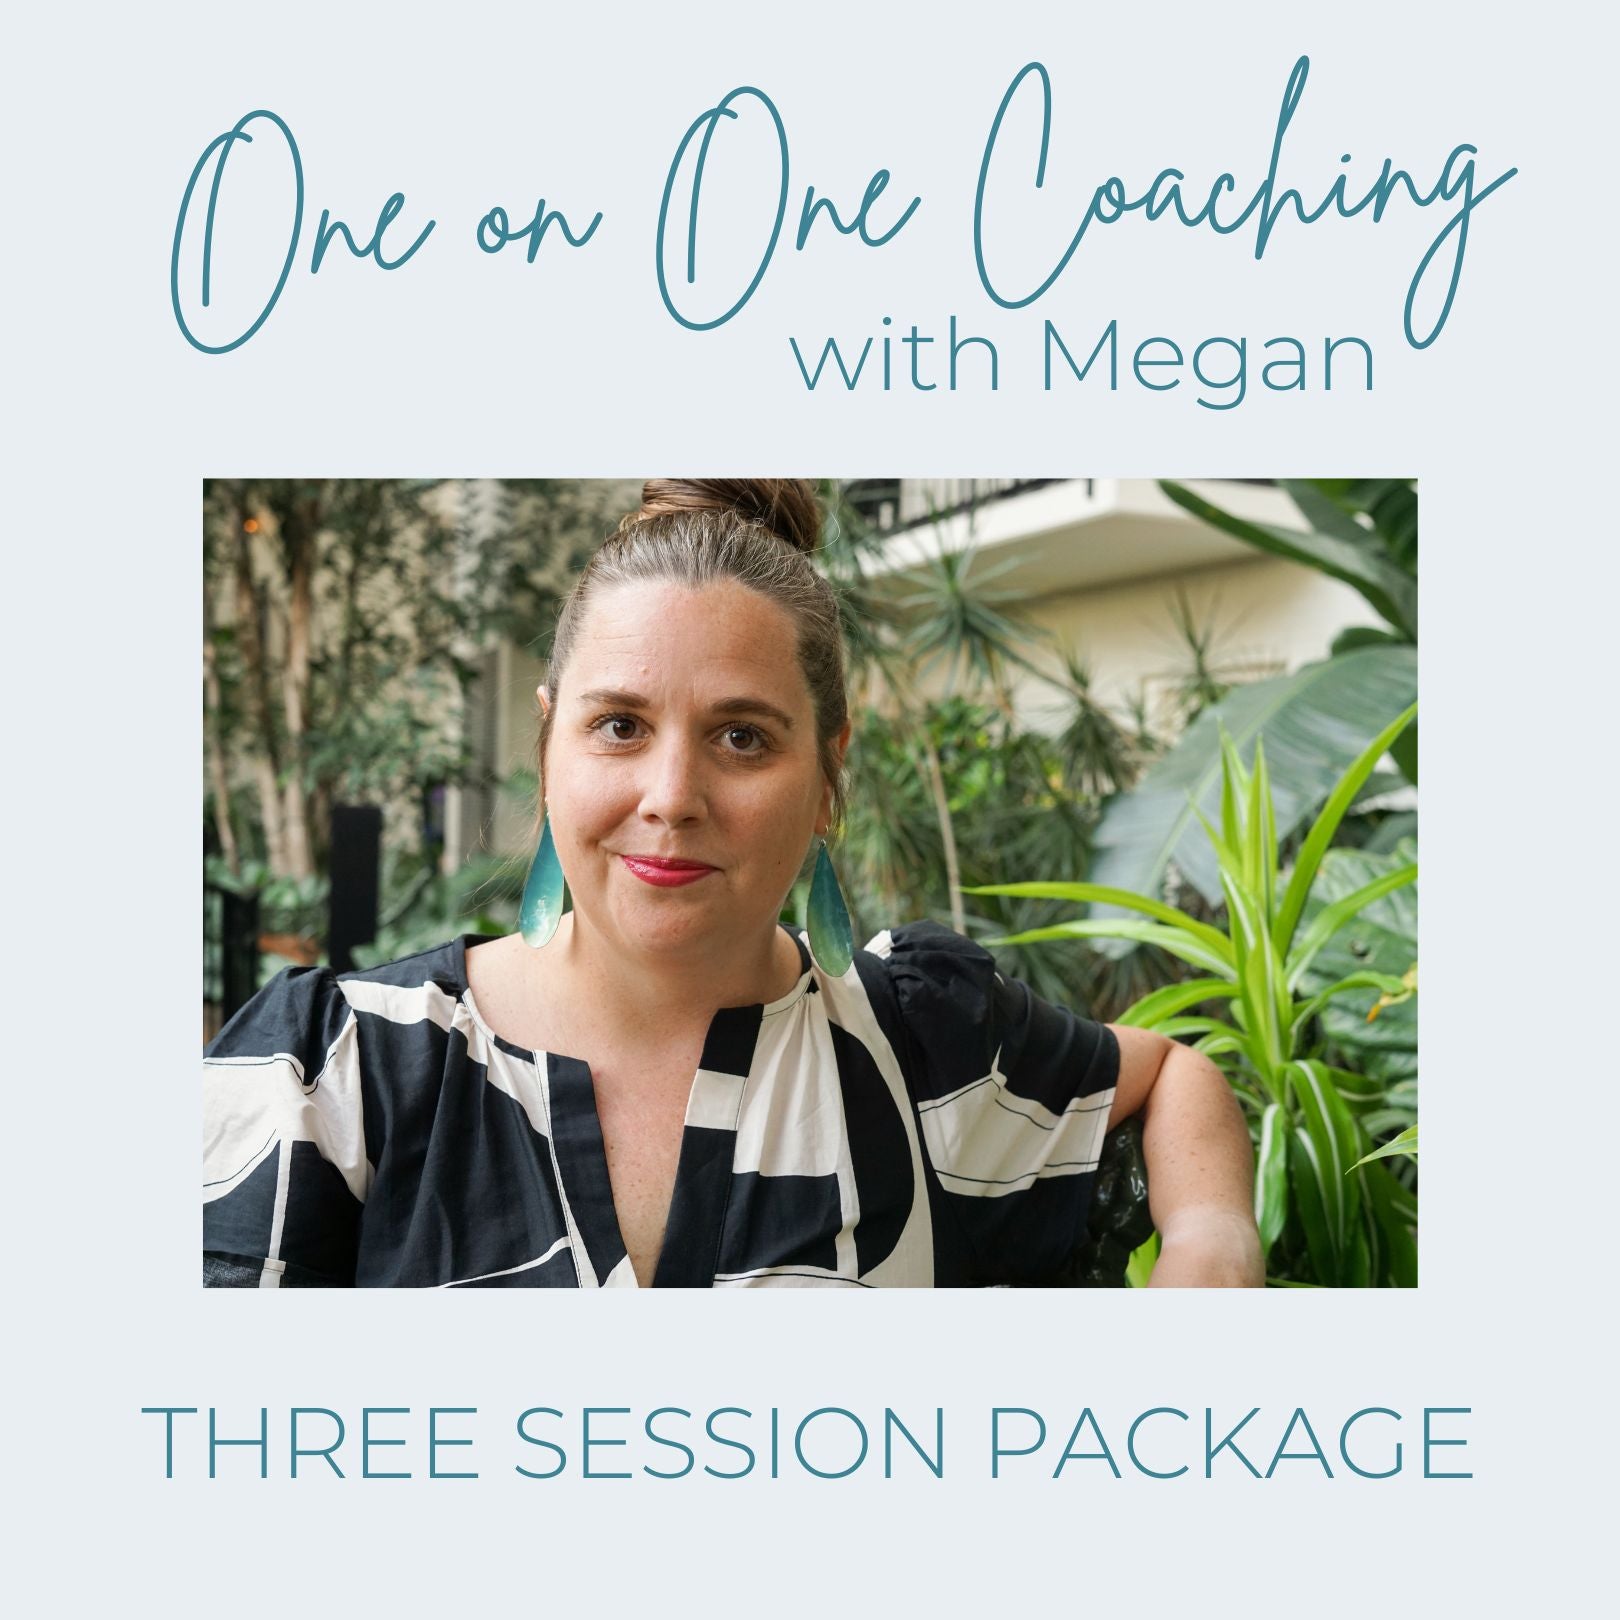 One on One Coaching with Megan - Three Session Package